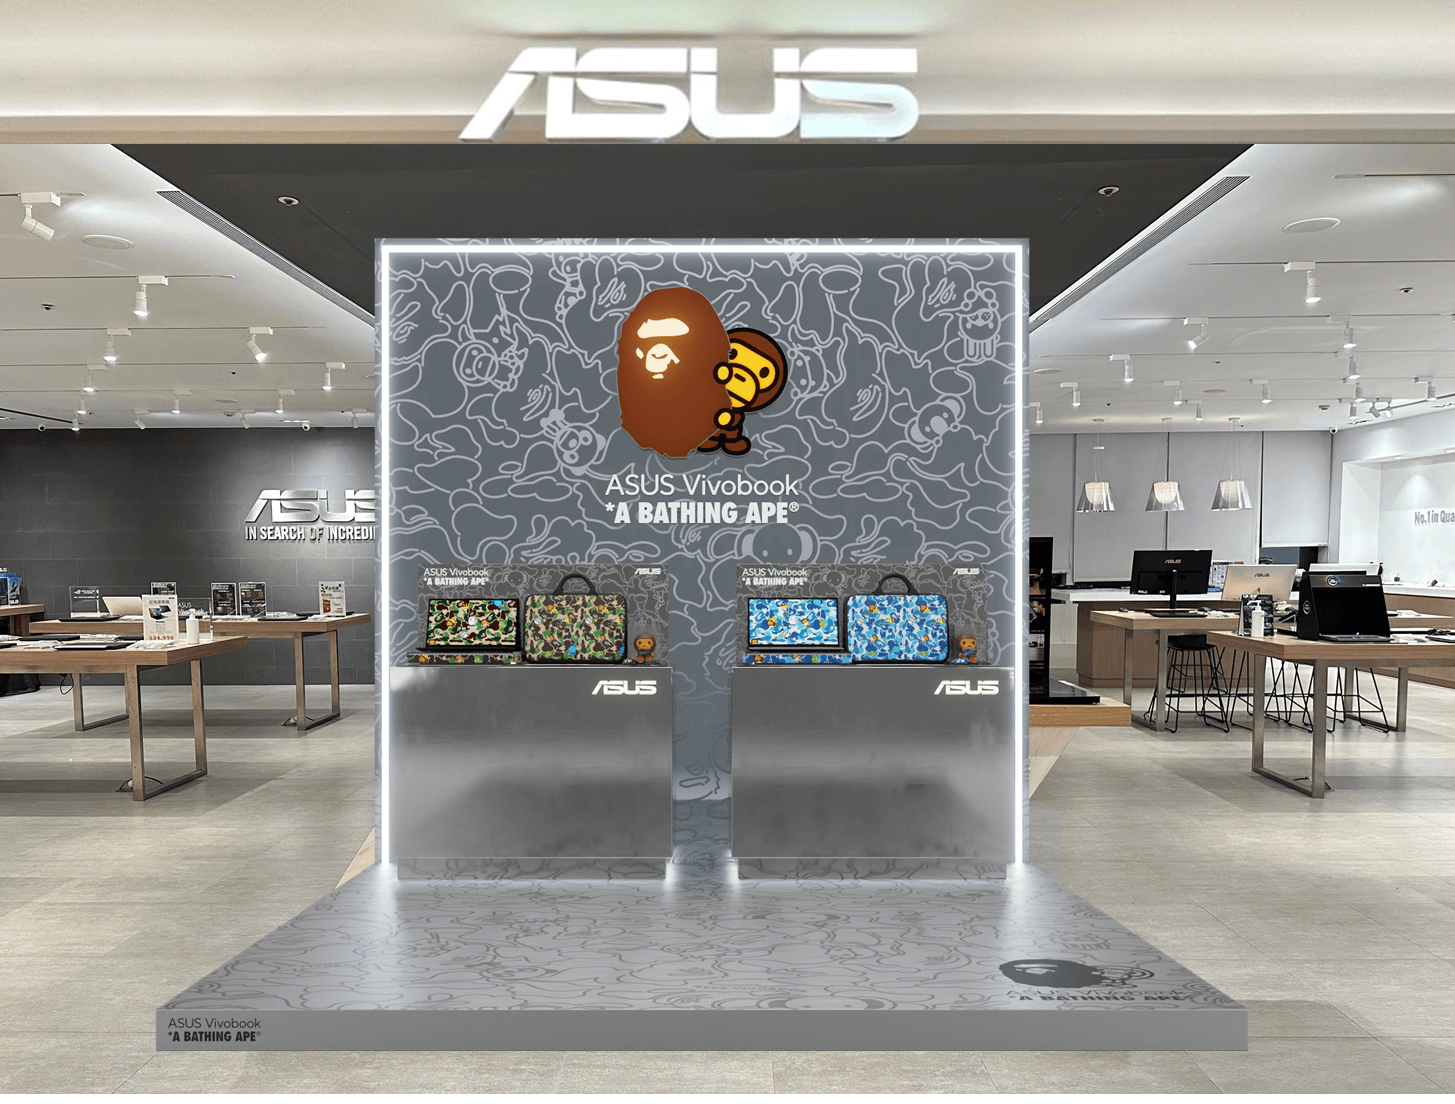 The image shows the ASUS Vivobook theme display at ASUS store.